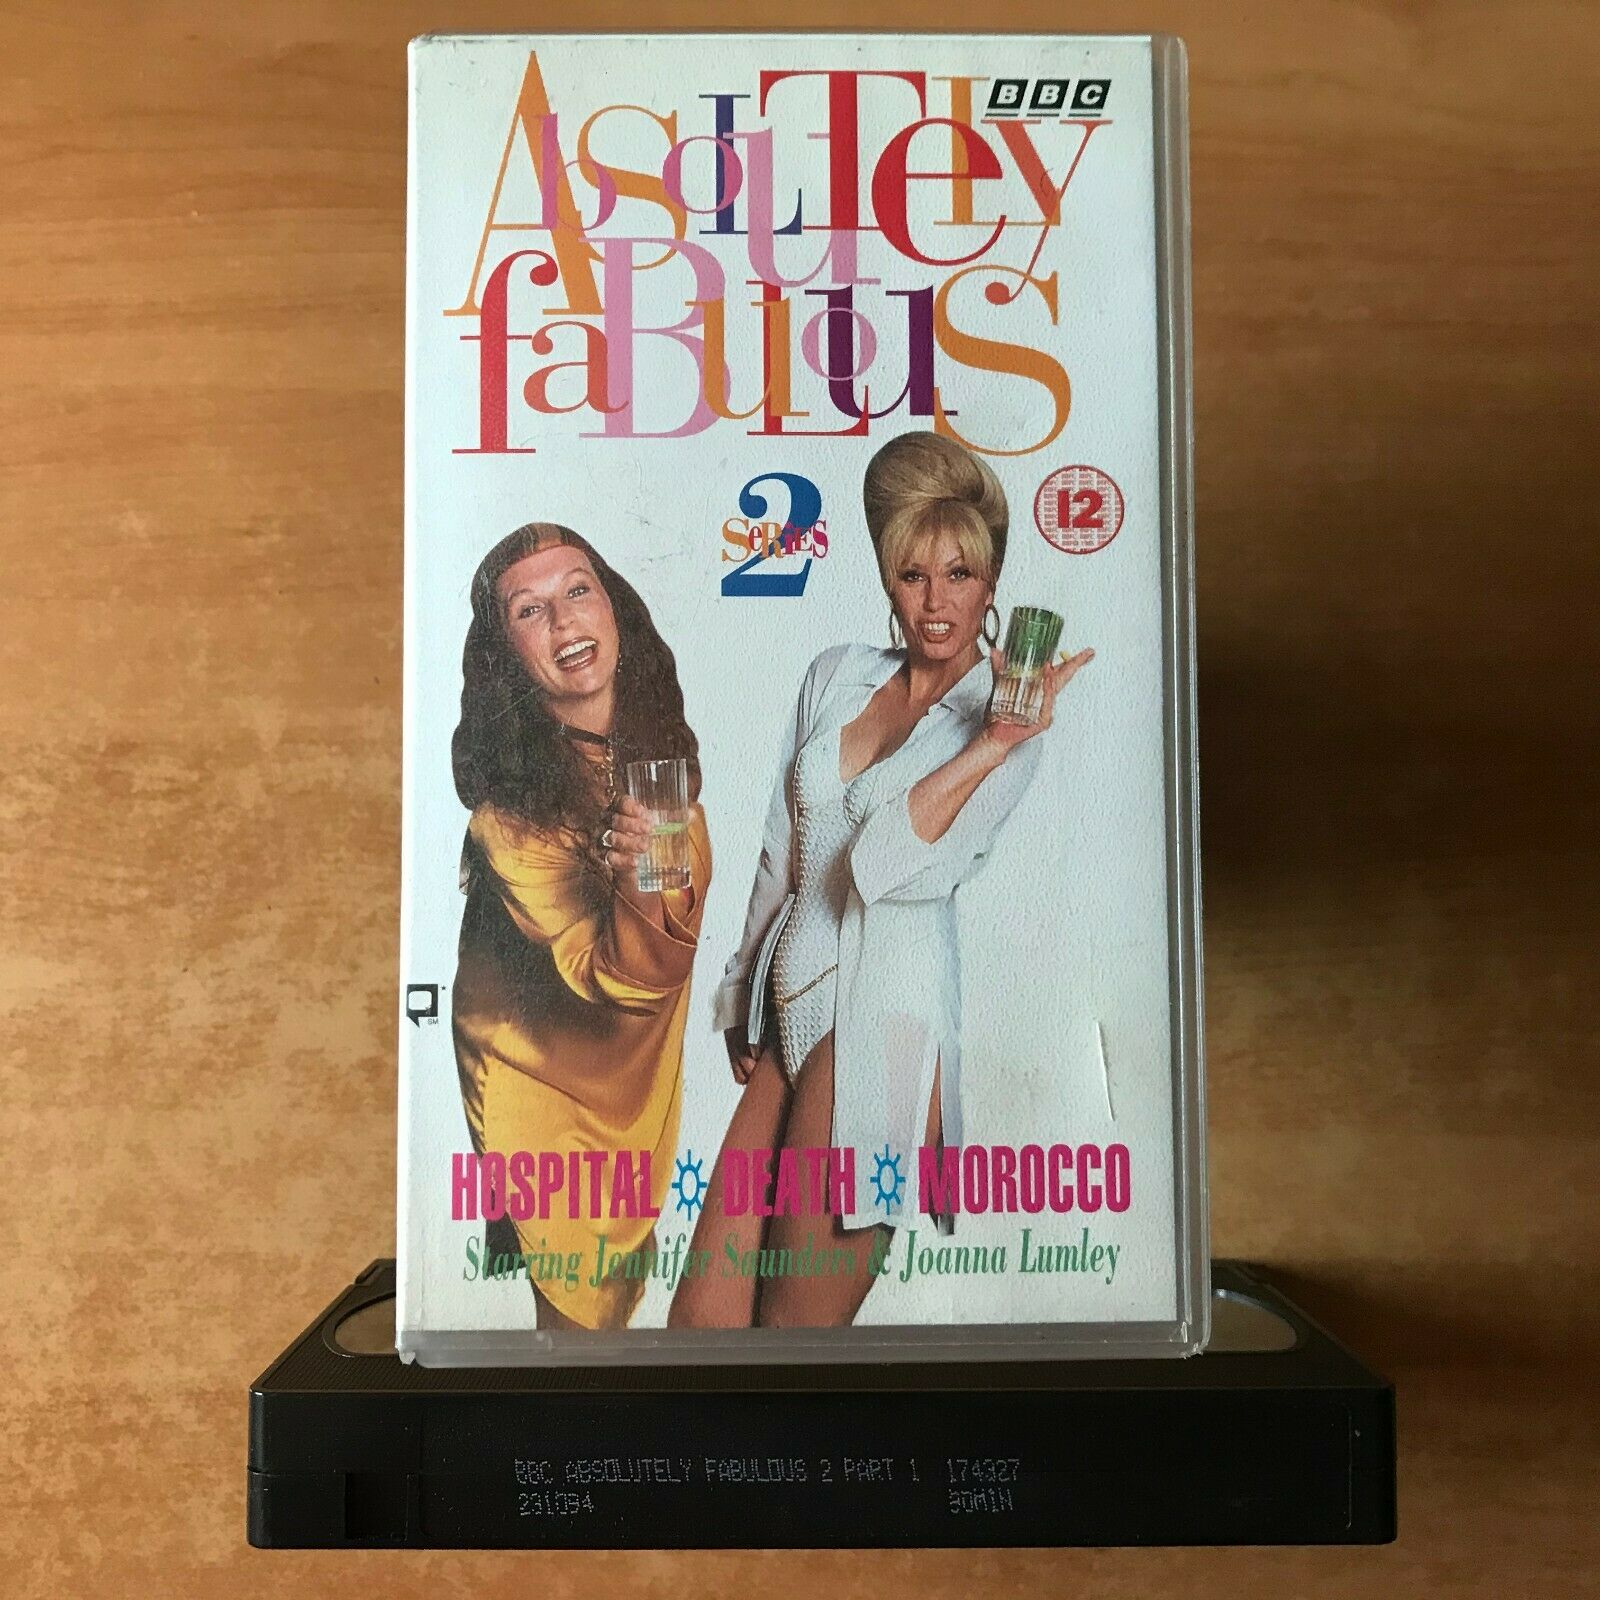 Absolutely Fabulous (Series 2): "Morocco" [BBC] Comedy - Jennifer Saunders - VHS-